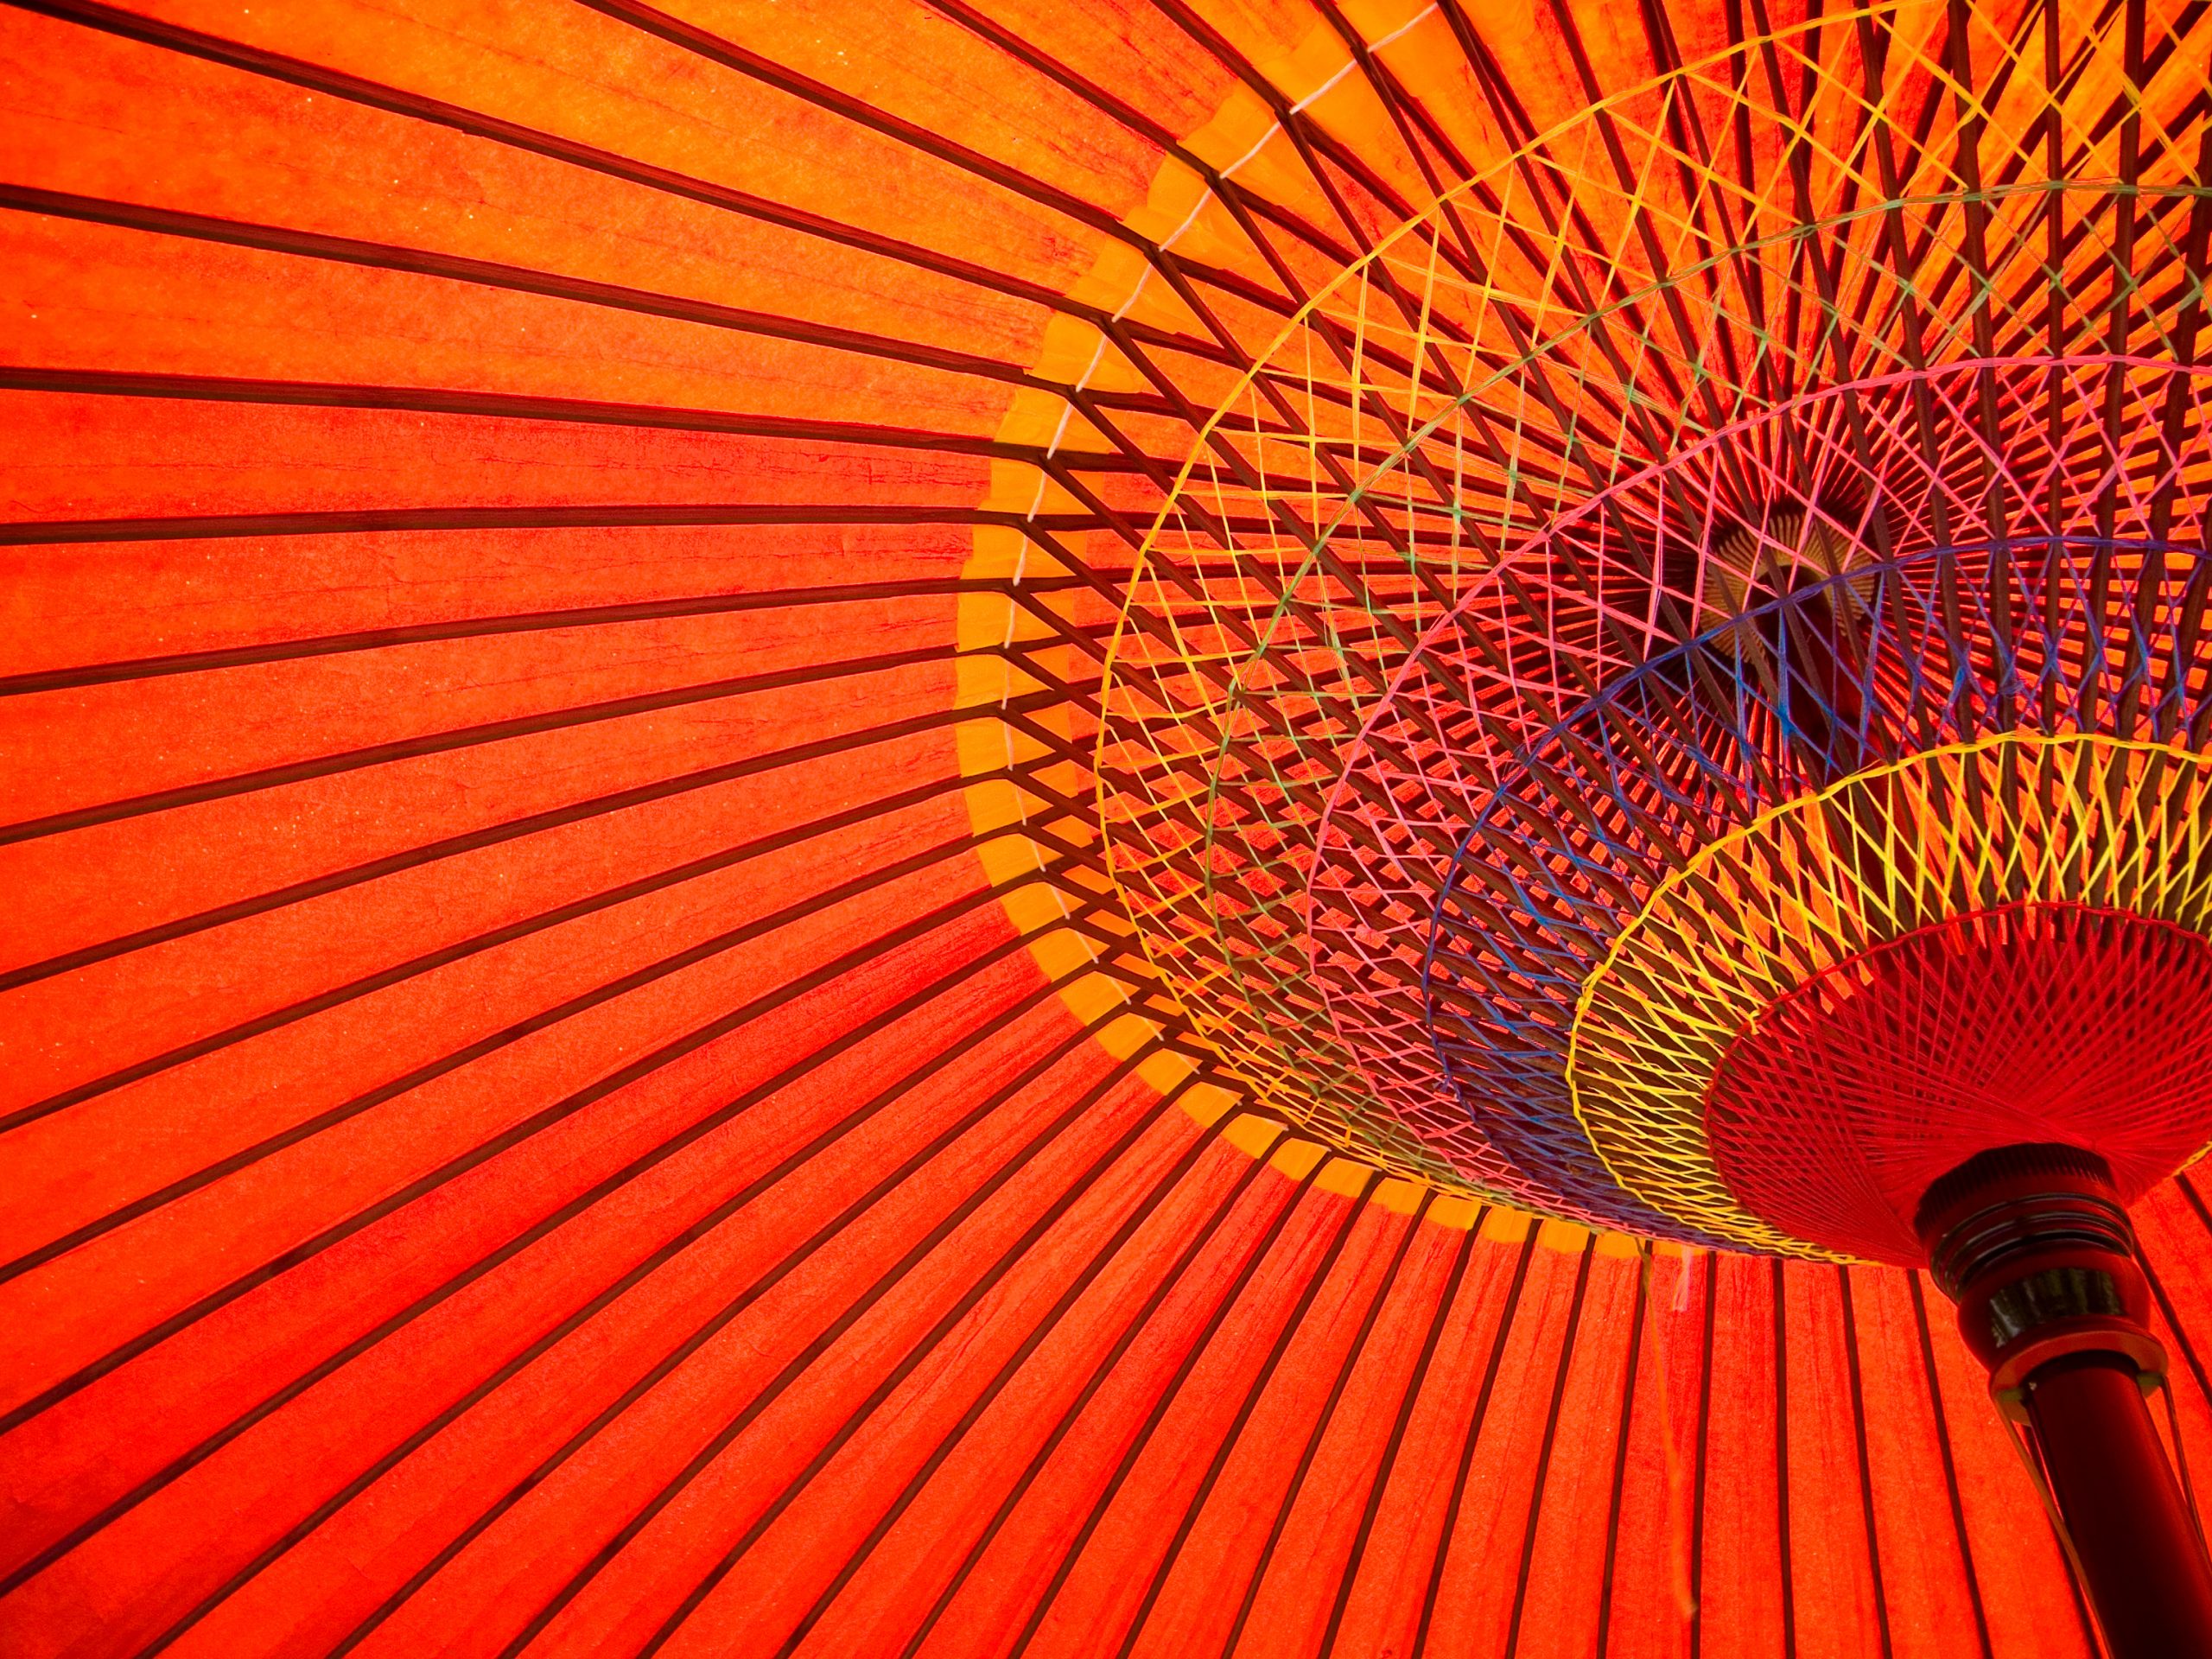 an abstract image showing the inside of a Japanese parasol